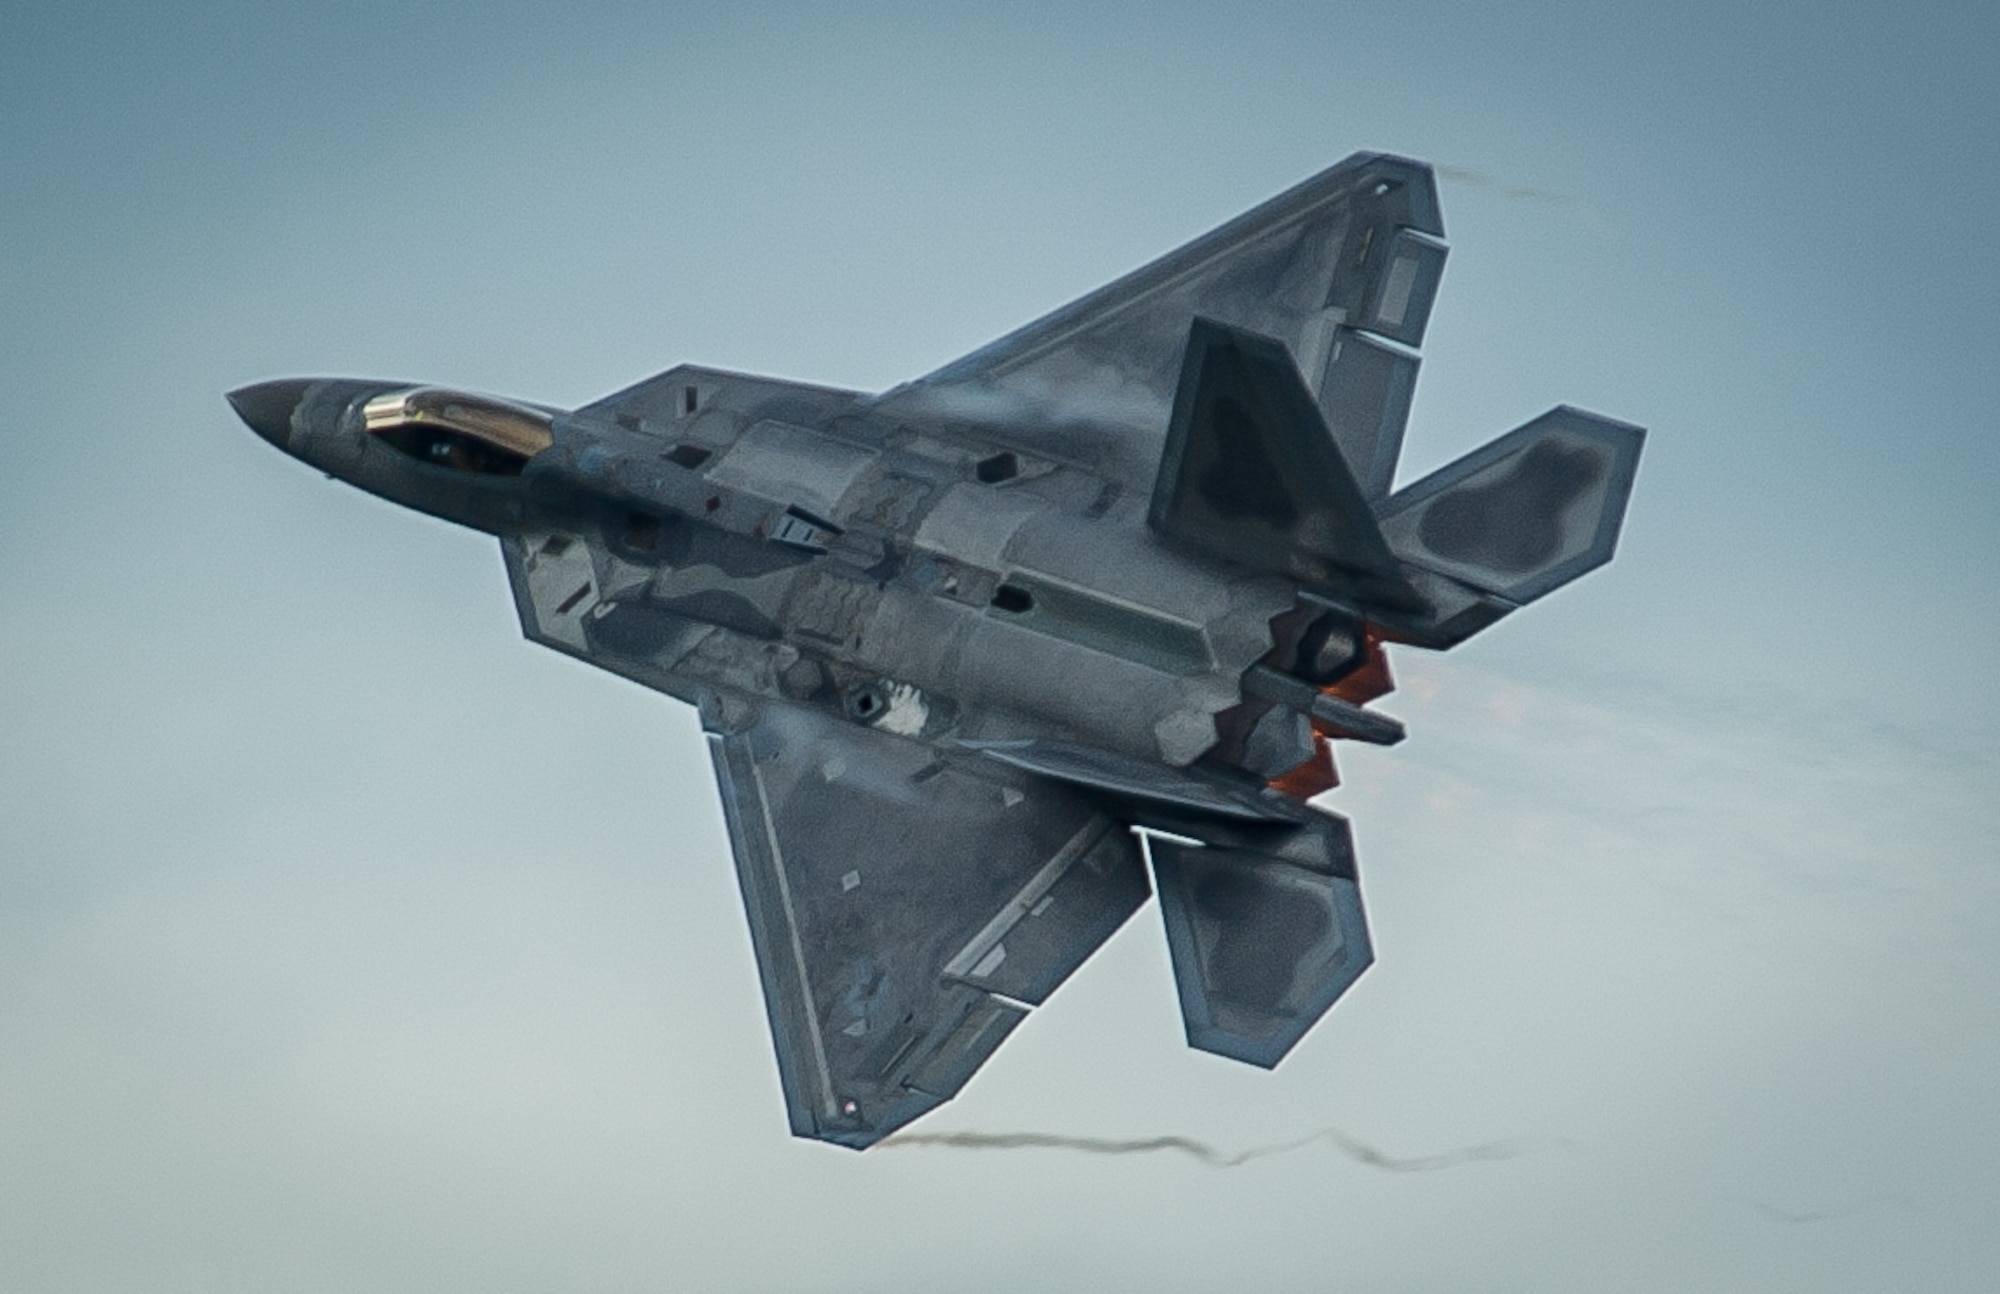 An F-22 Raptor takes off from ??mari Air Base, Estonia, Sept. 4, 2015, following a brief forward deployment. The F-22s have previously deployed to both the Pacific and Southwest Asia for Airmen to train in a realistic environment while testing partner nations' ability to host advanced aircraft like the F-22. The F-22s are deployed from the 95th Fighter Squadron at Tyndall Air Force Base, Florida. The U.S. Air Force routinely deploys aircraft and Airmen to Europe for training and exercises. (U.S. Air Force photo/ Tech. Sgt. Ryan Crane)